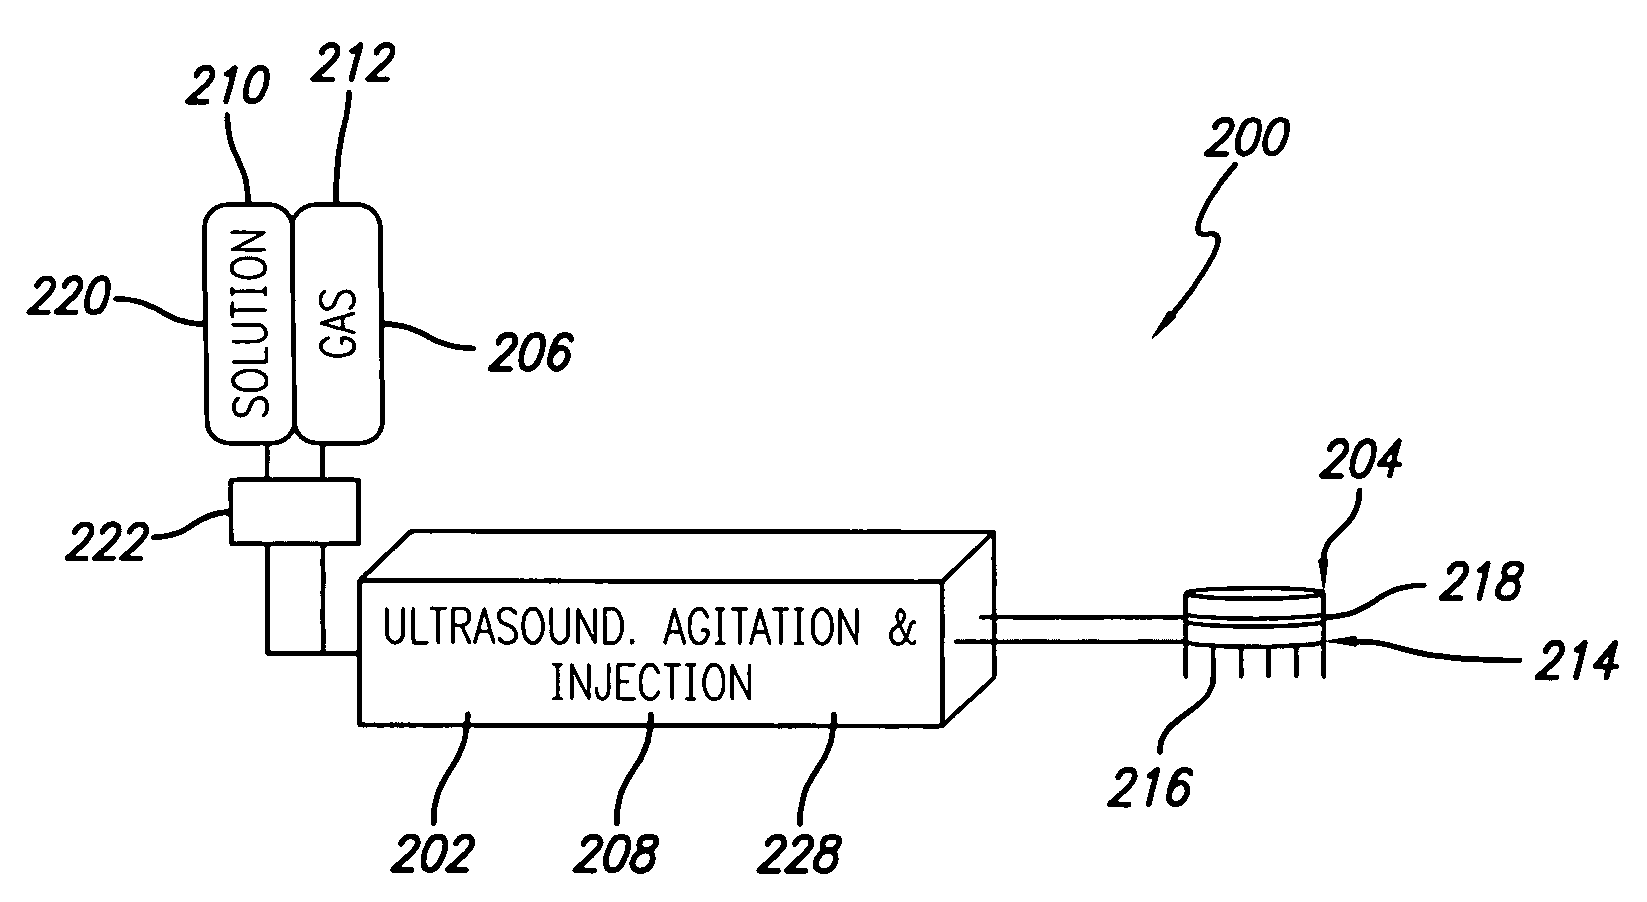 Method for treating subcutaneous tissues